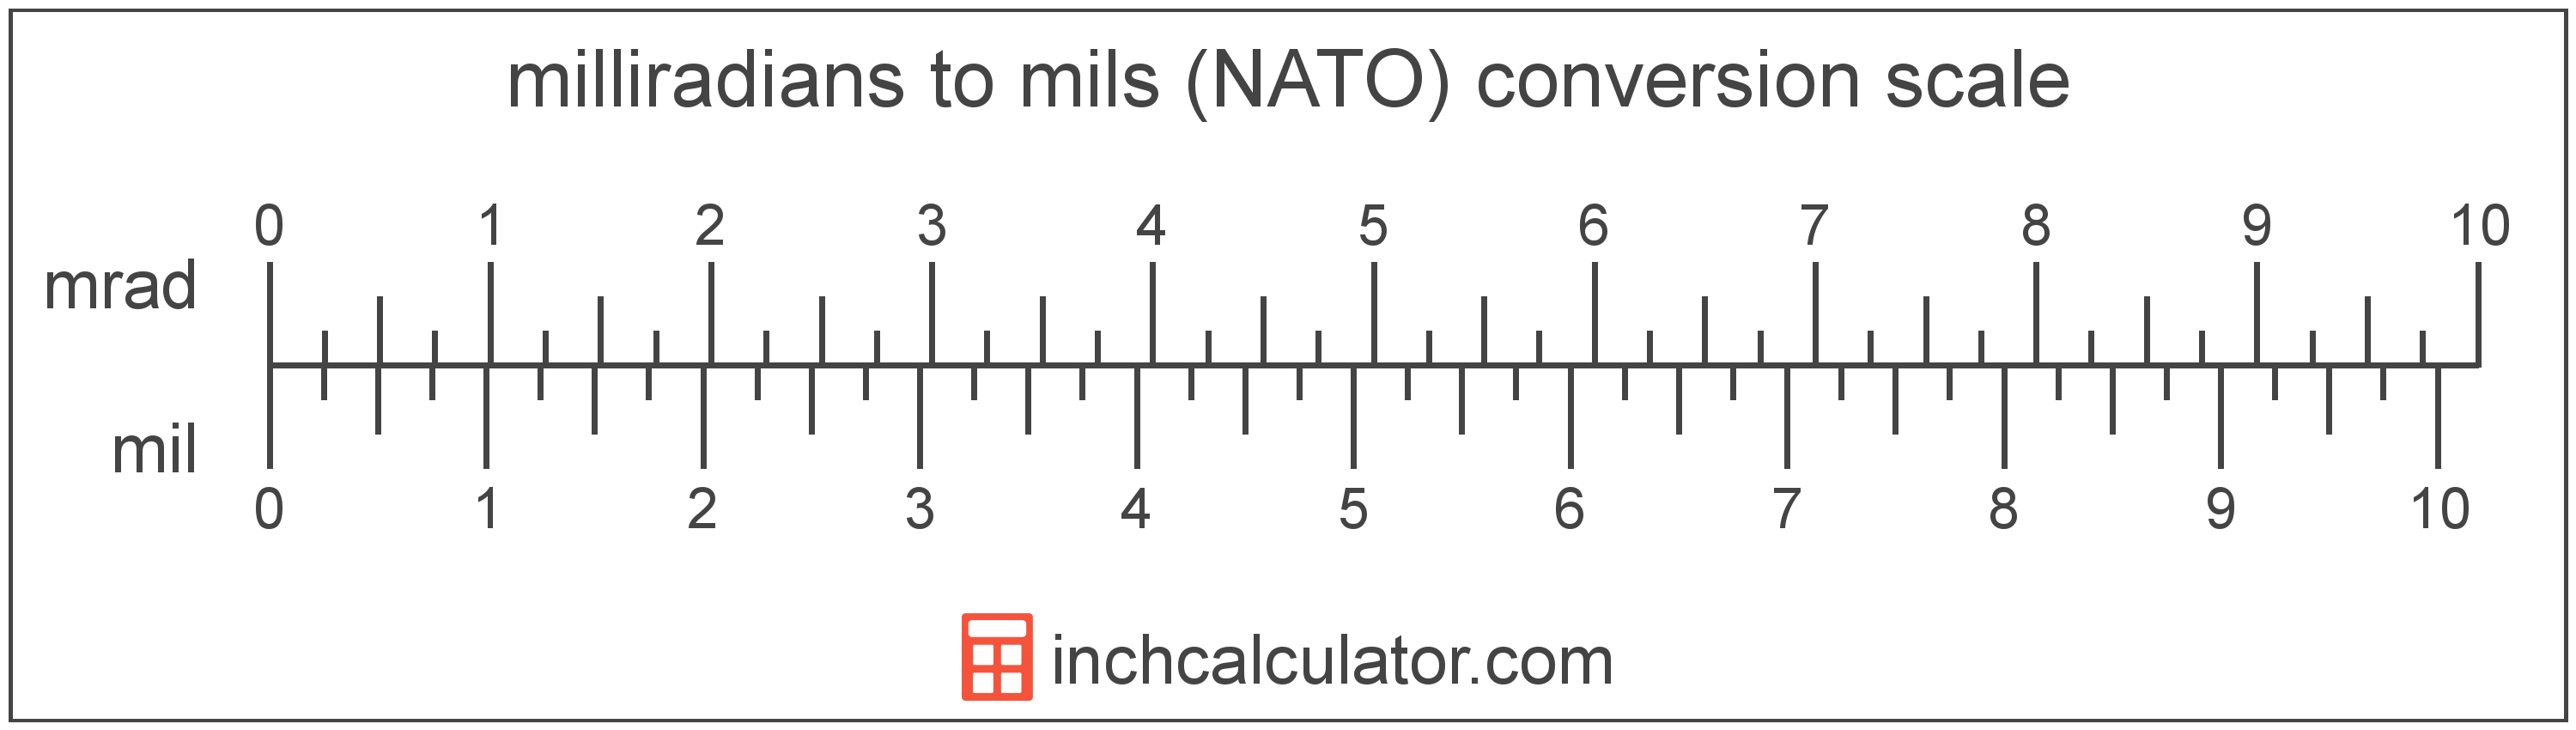 conversion scale showing milliradians and equivalent mils (NATO) angle values